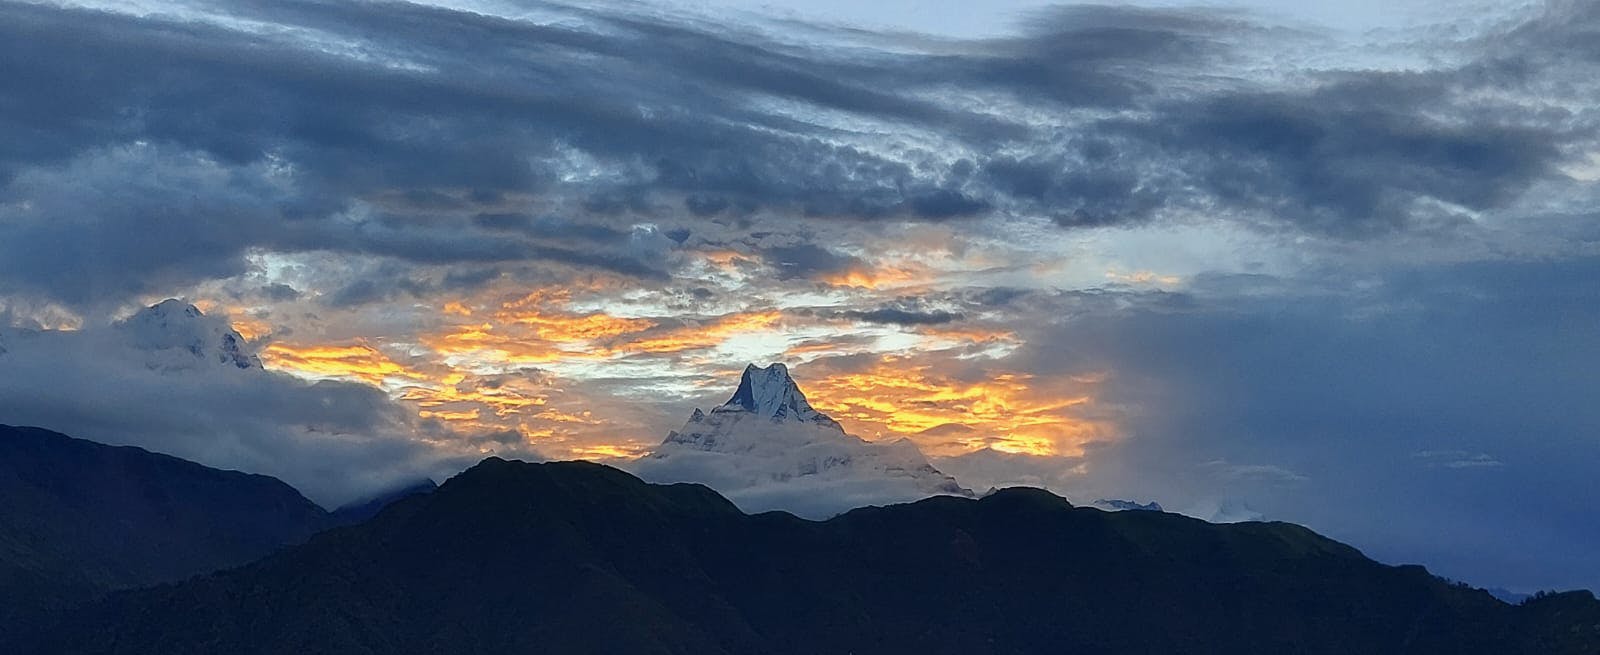 What is the typical weather like during the Annapurna Base Camp Trek?